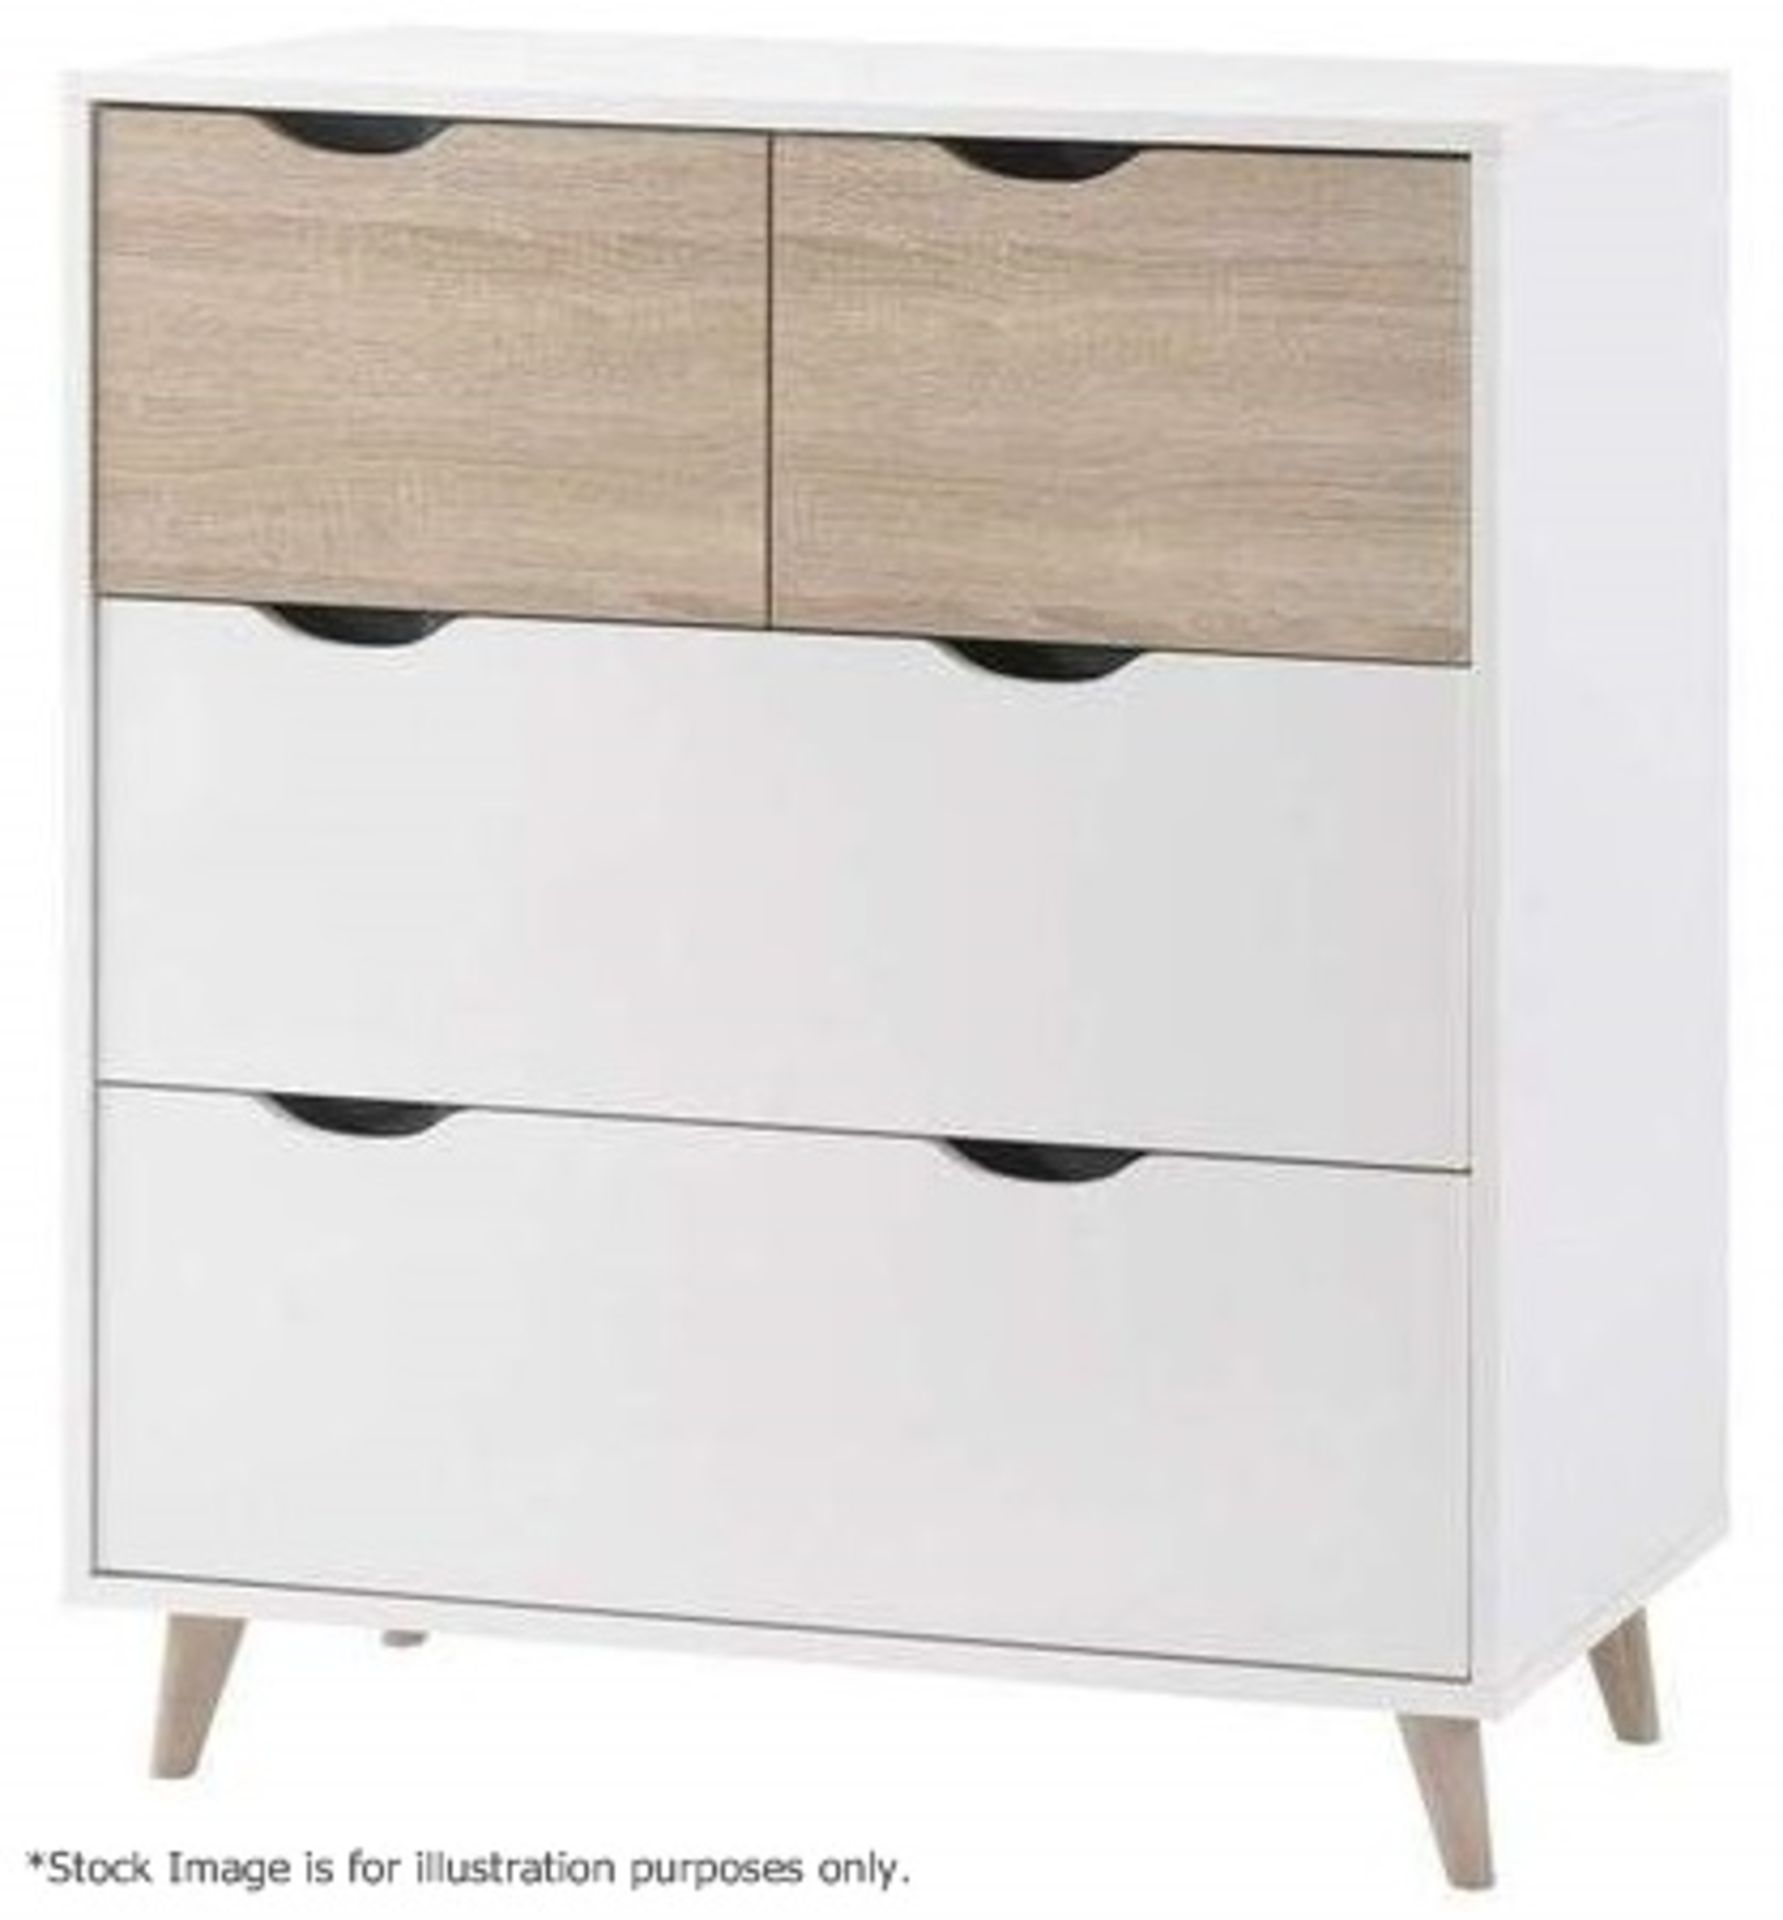 1 x 'Stockholm' Scandinavian Style Chest Of Drawers - Dimensions: 82 x 90 x 39cm - Brand New Boxed - Image 4 of 5